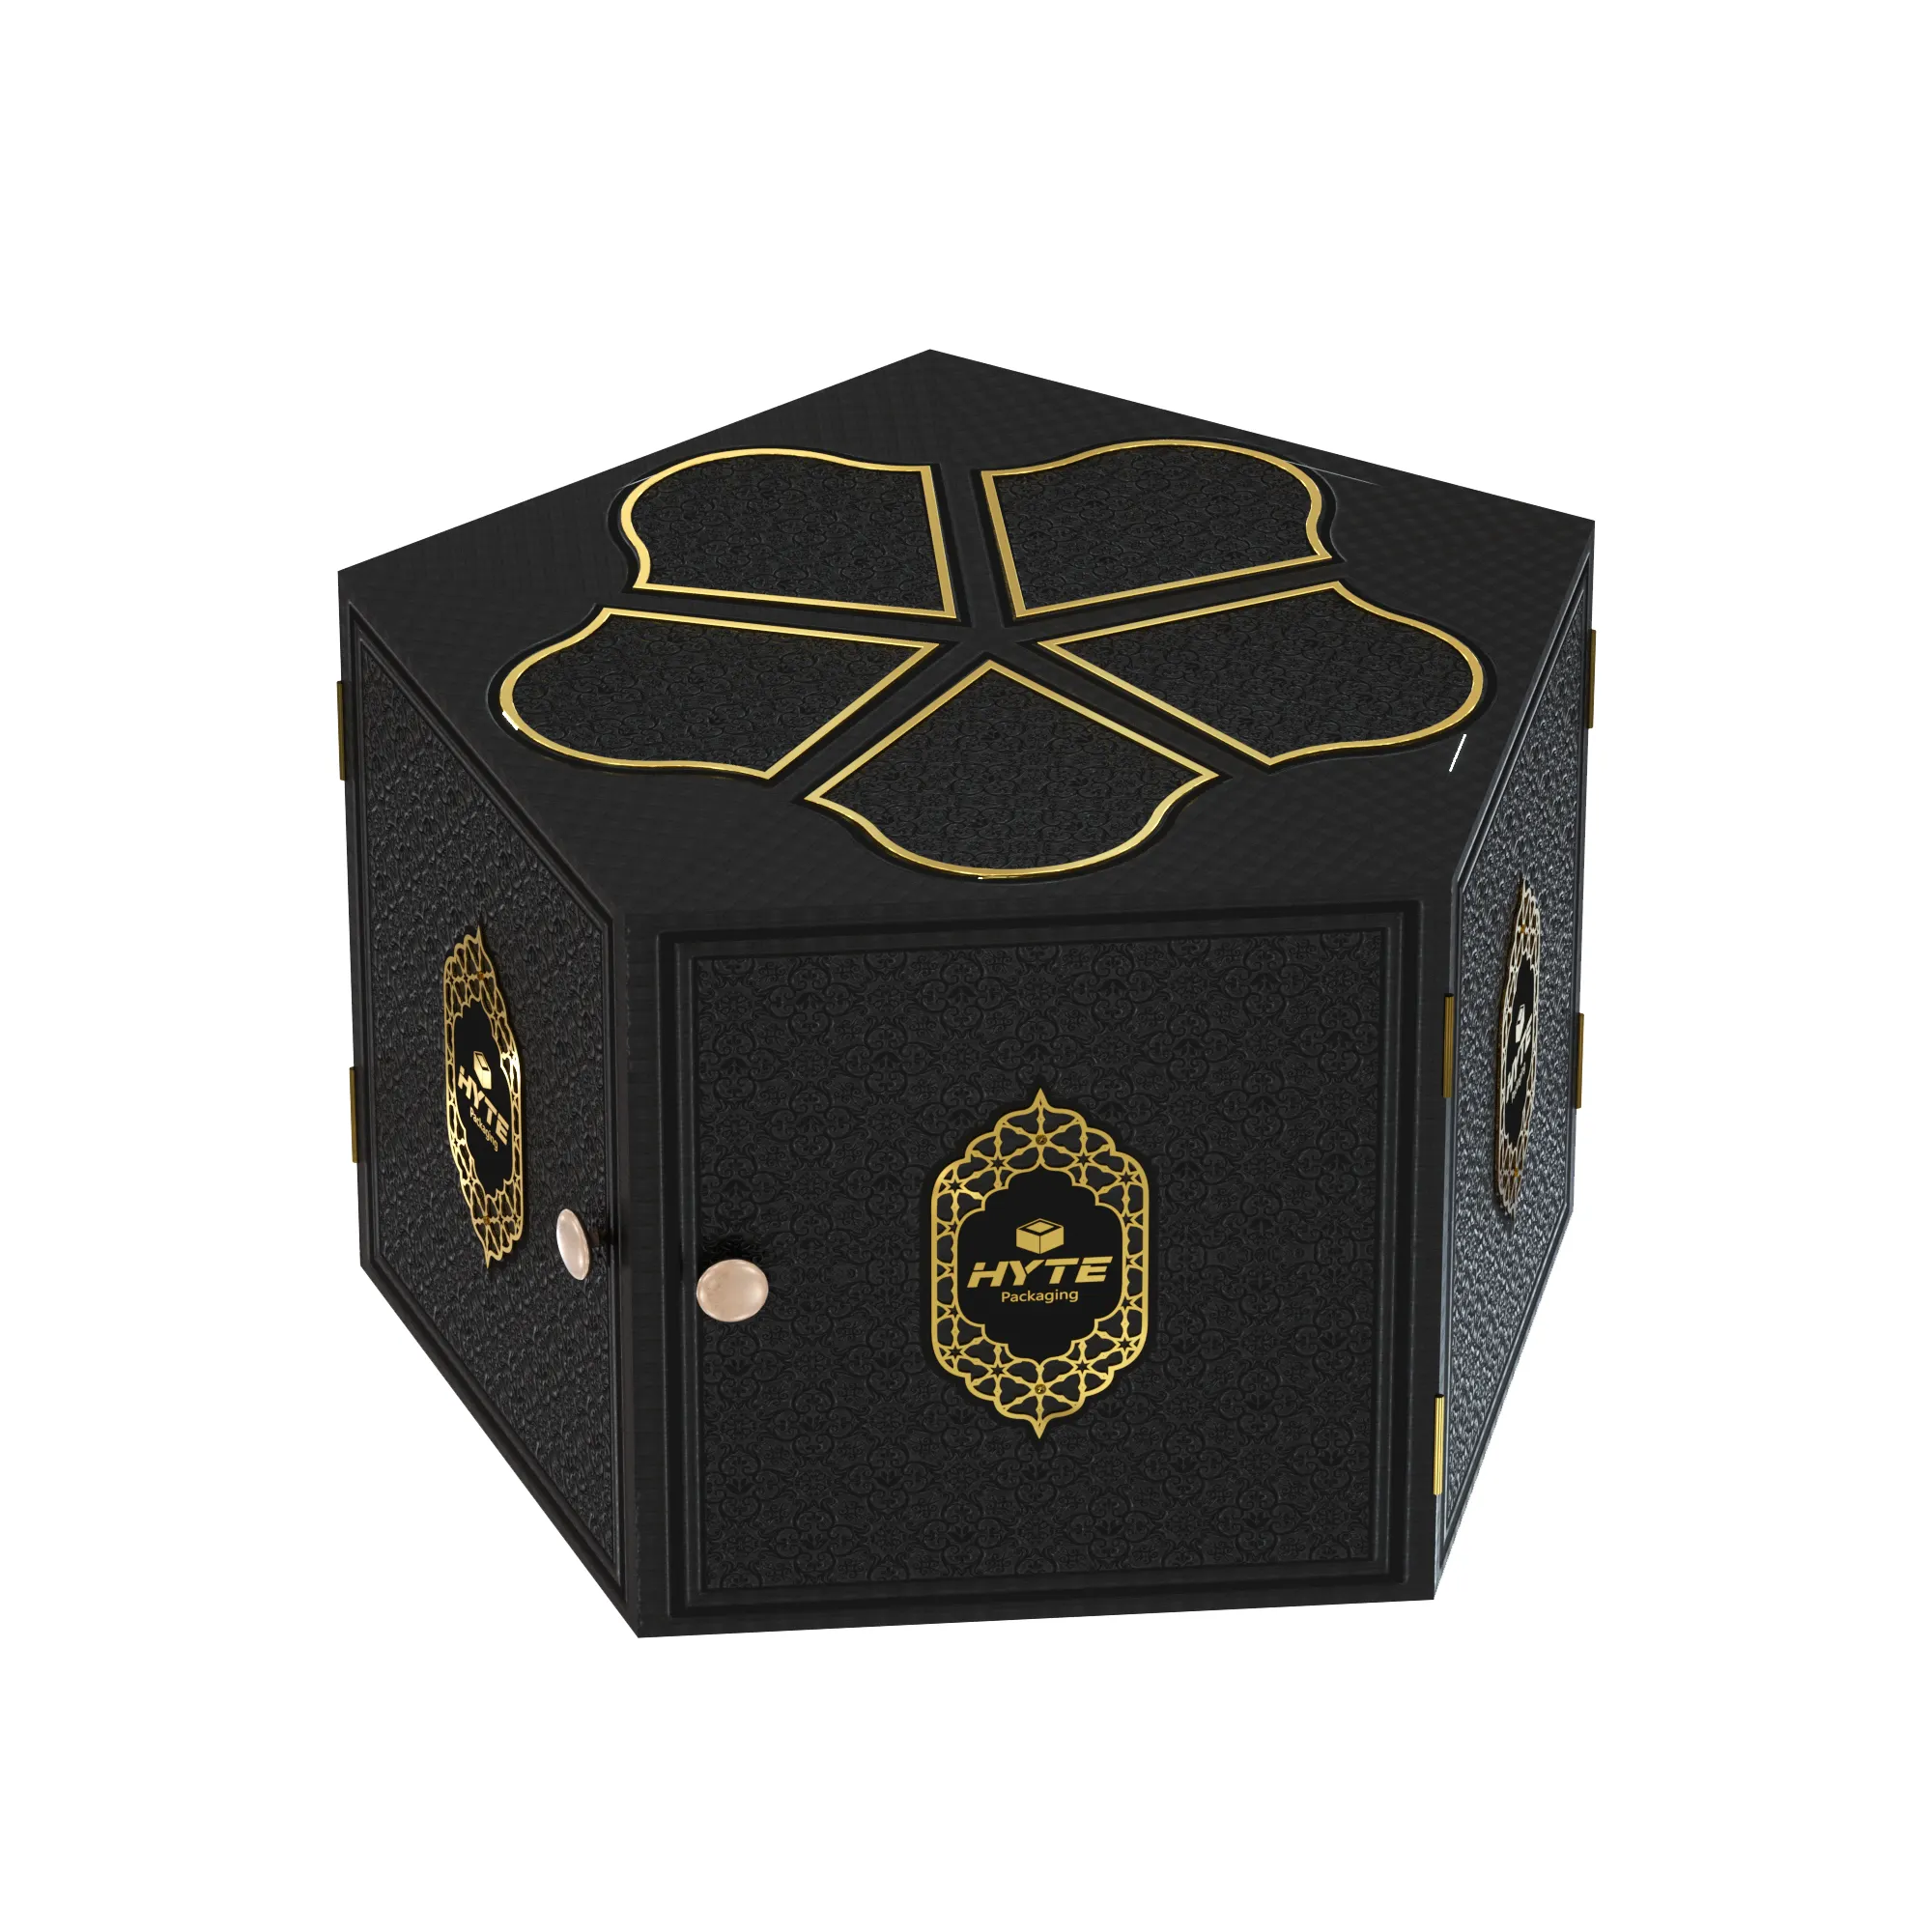 Morden Style High End Hexagon Round Perfume Luxury Small Fancy Wooden With Lid Wood Crate Gift Cosmetic Box